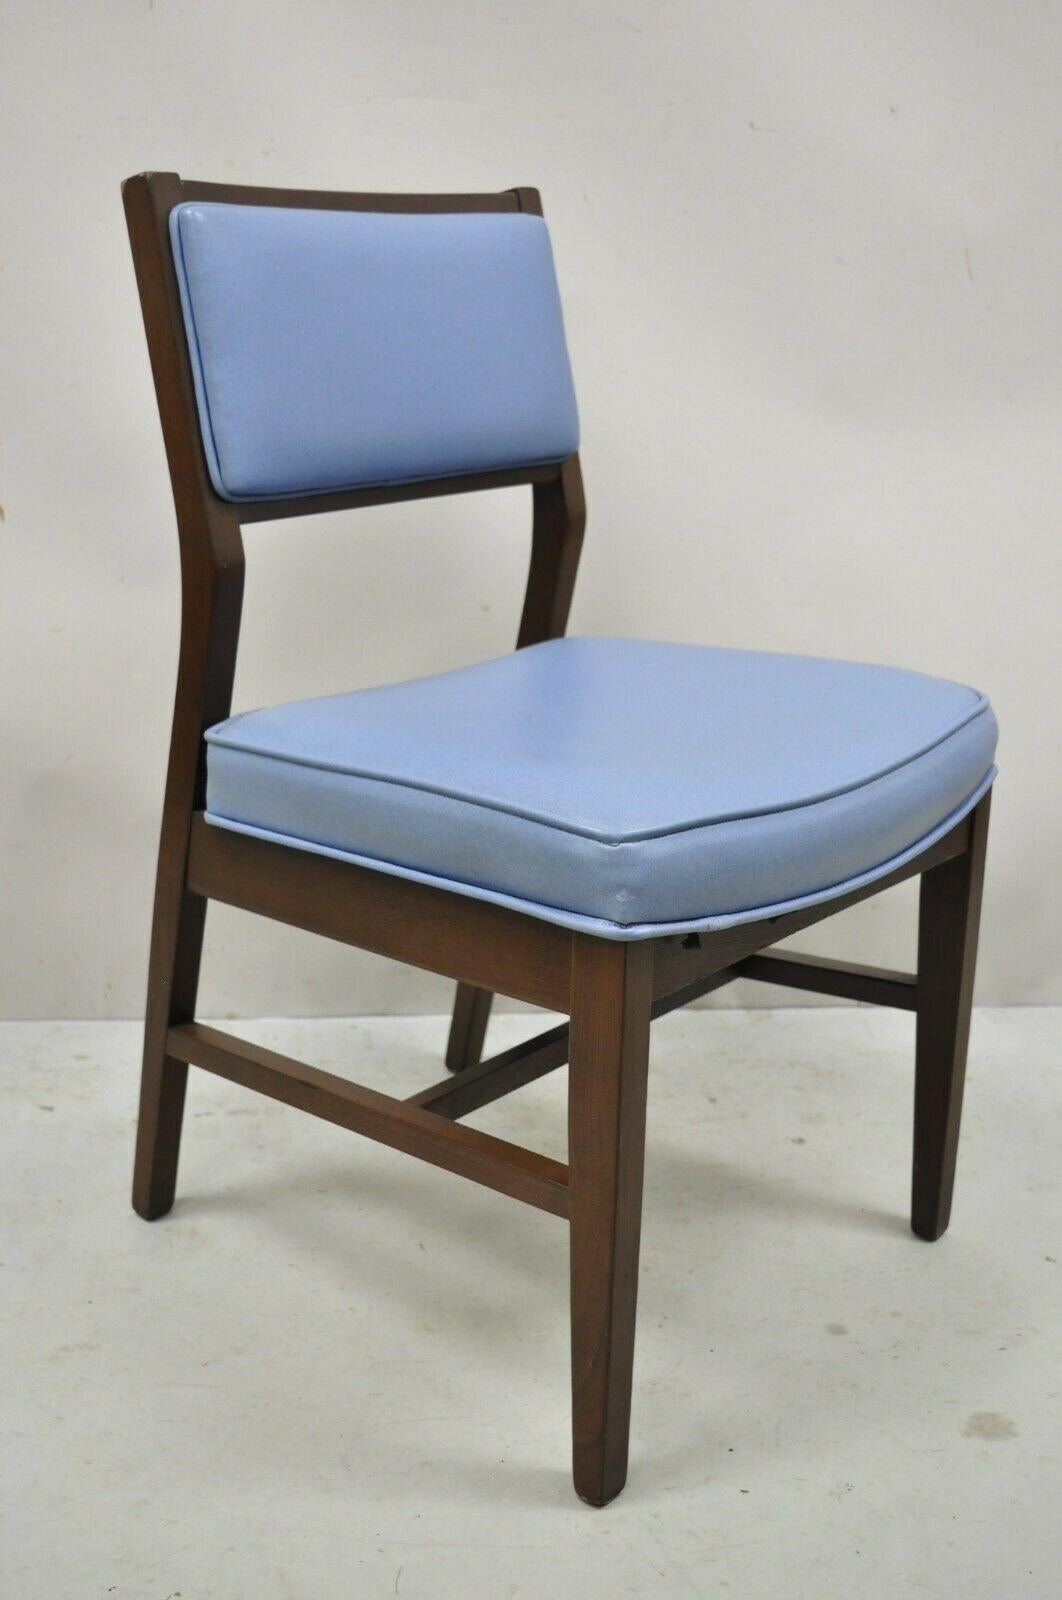 Vintage Mid Century Modern Jens Risom Style Blue Sculpted Dining Chair -Set of 6 For Sale 2